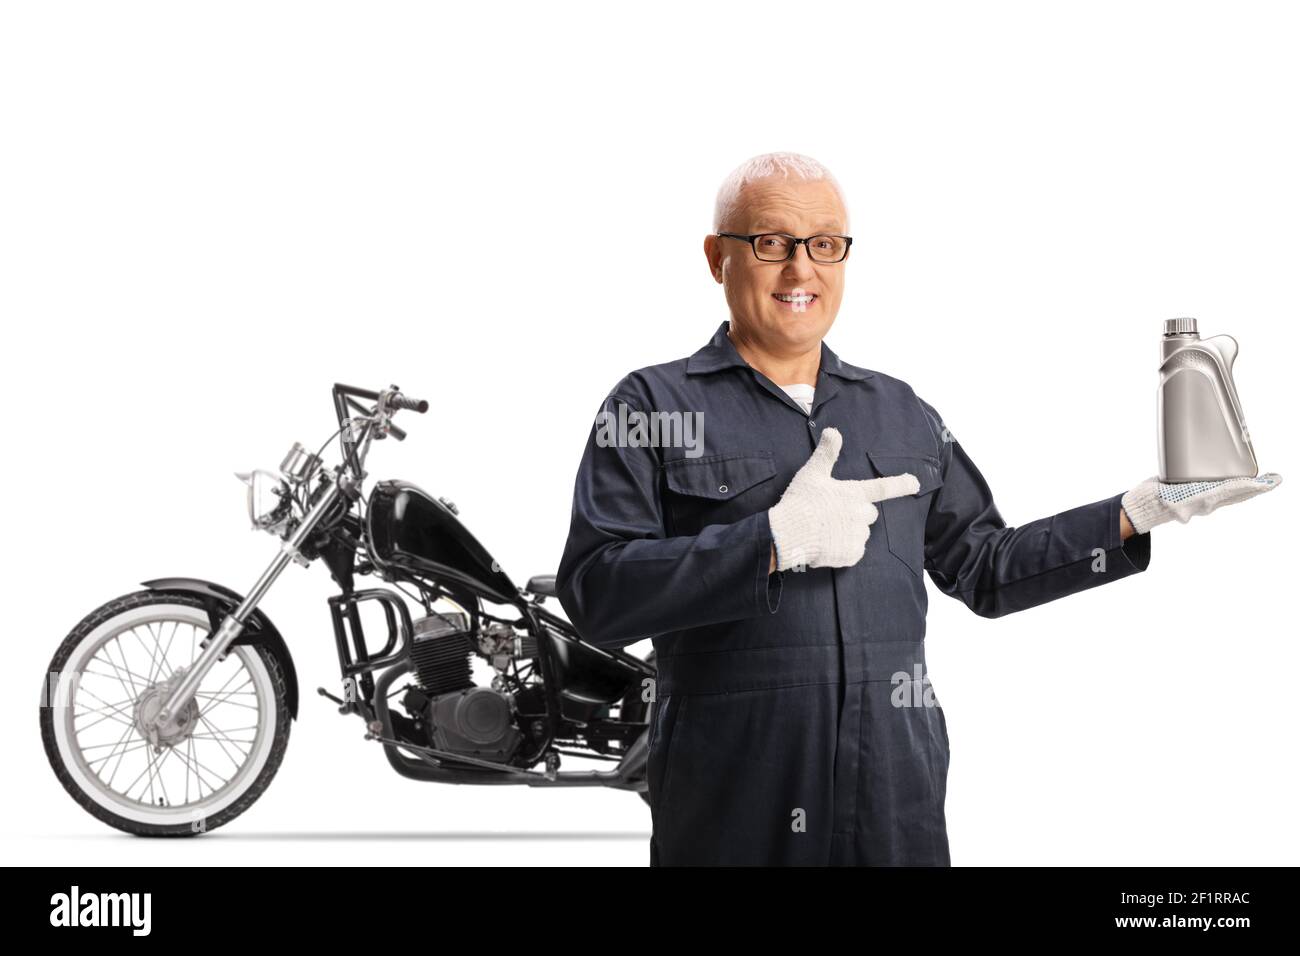 Motorbike mechanic holding an engine oil and posing in front of a chopper isolated on white background Stock Photo